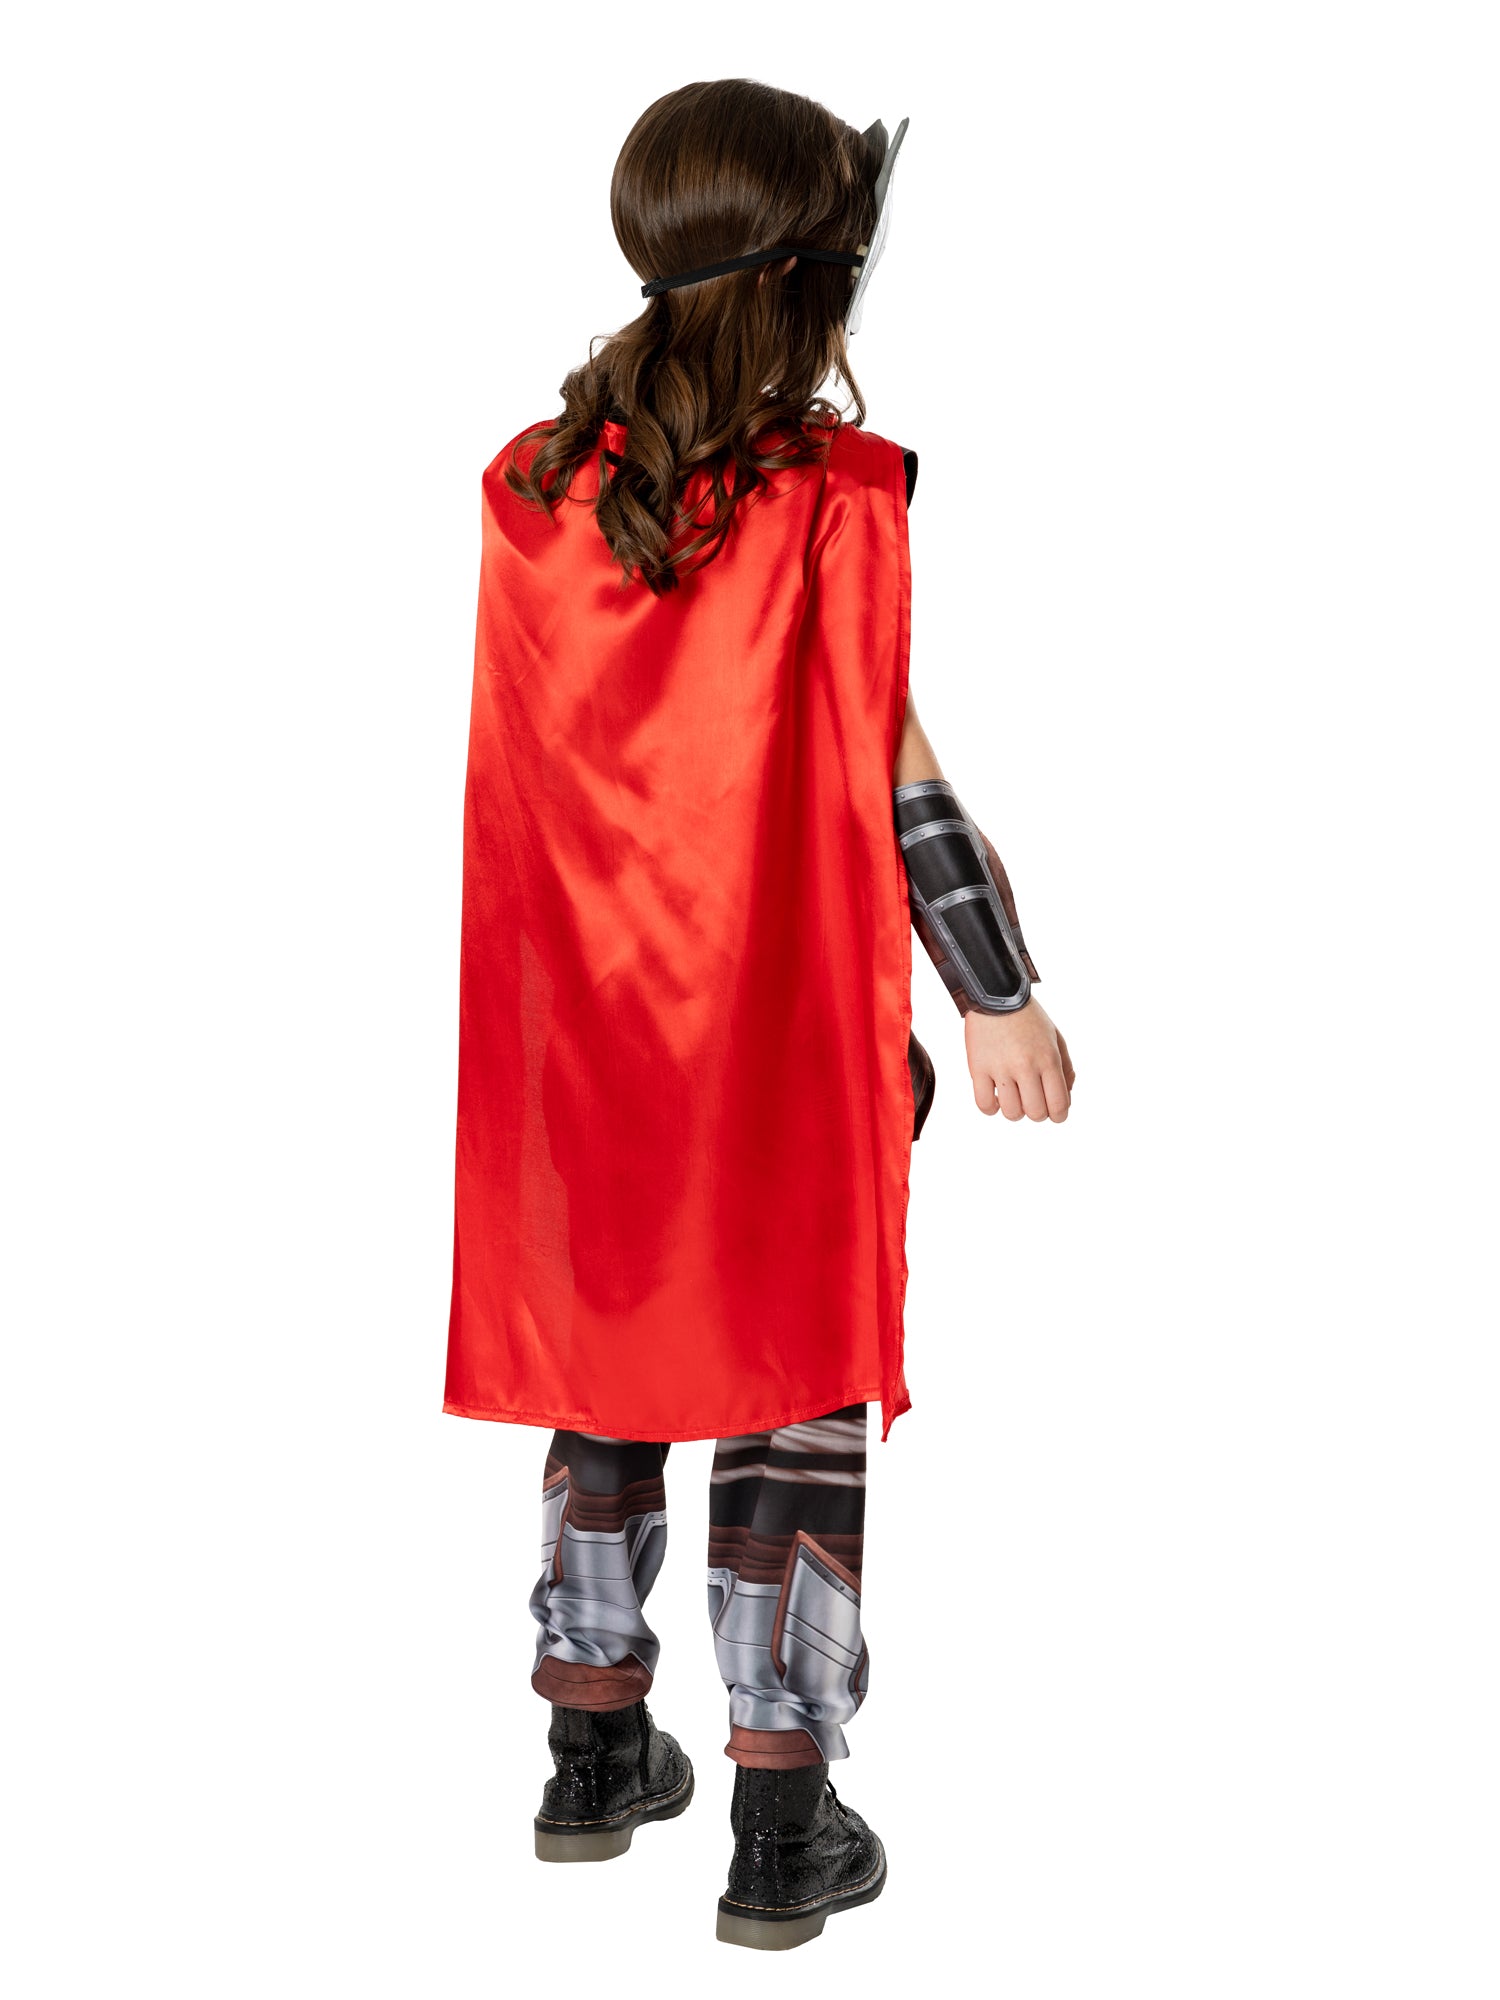 Thor, Avengers, Brown, Marvel, Kids Costumes, 7-8 years, Back